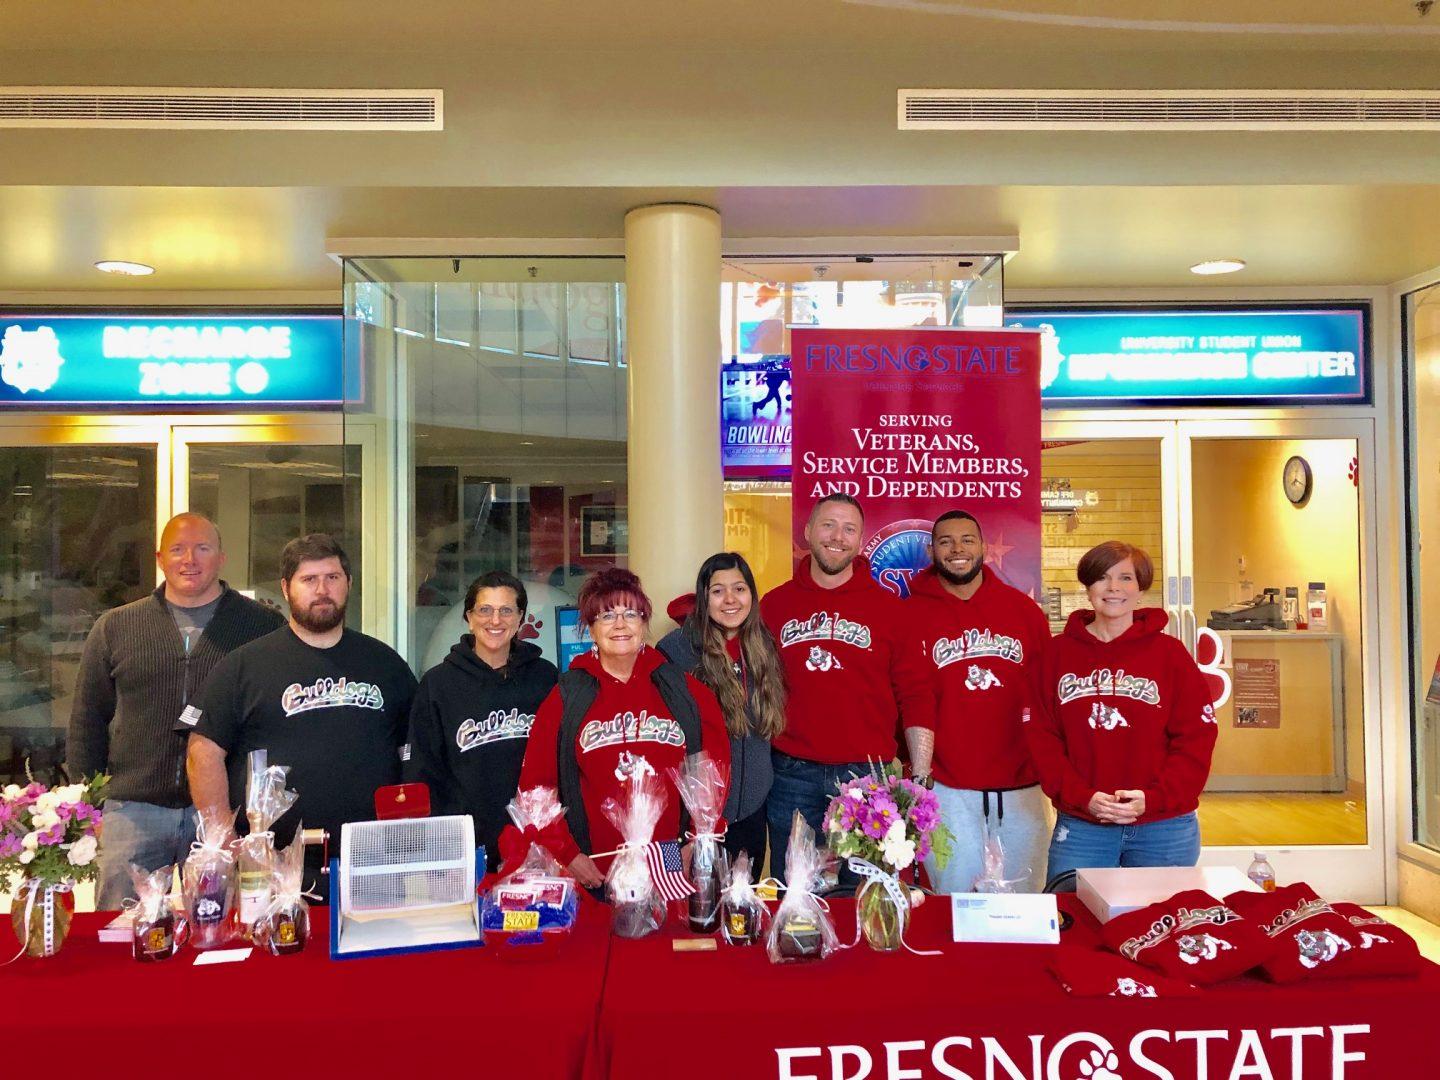 The Veterans Services Office at Fresno State hosted Red Friday on Friday, Nov. 1, 2019 in the University Student Union. (Courtesy Veterans Services Office)